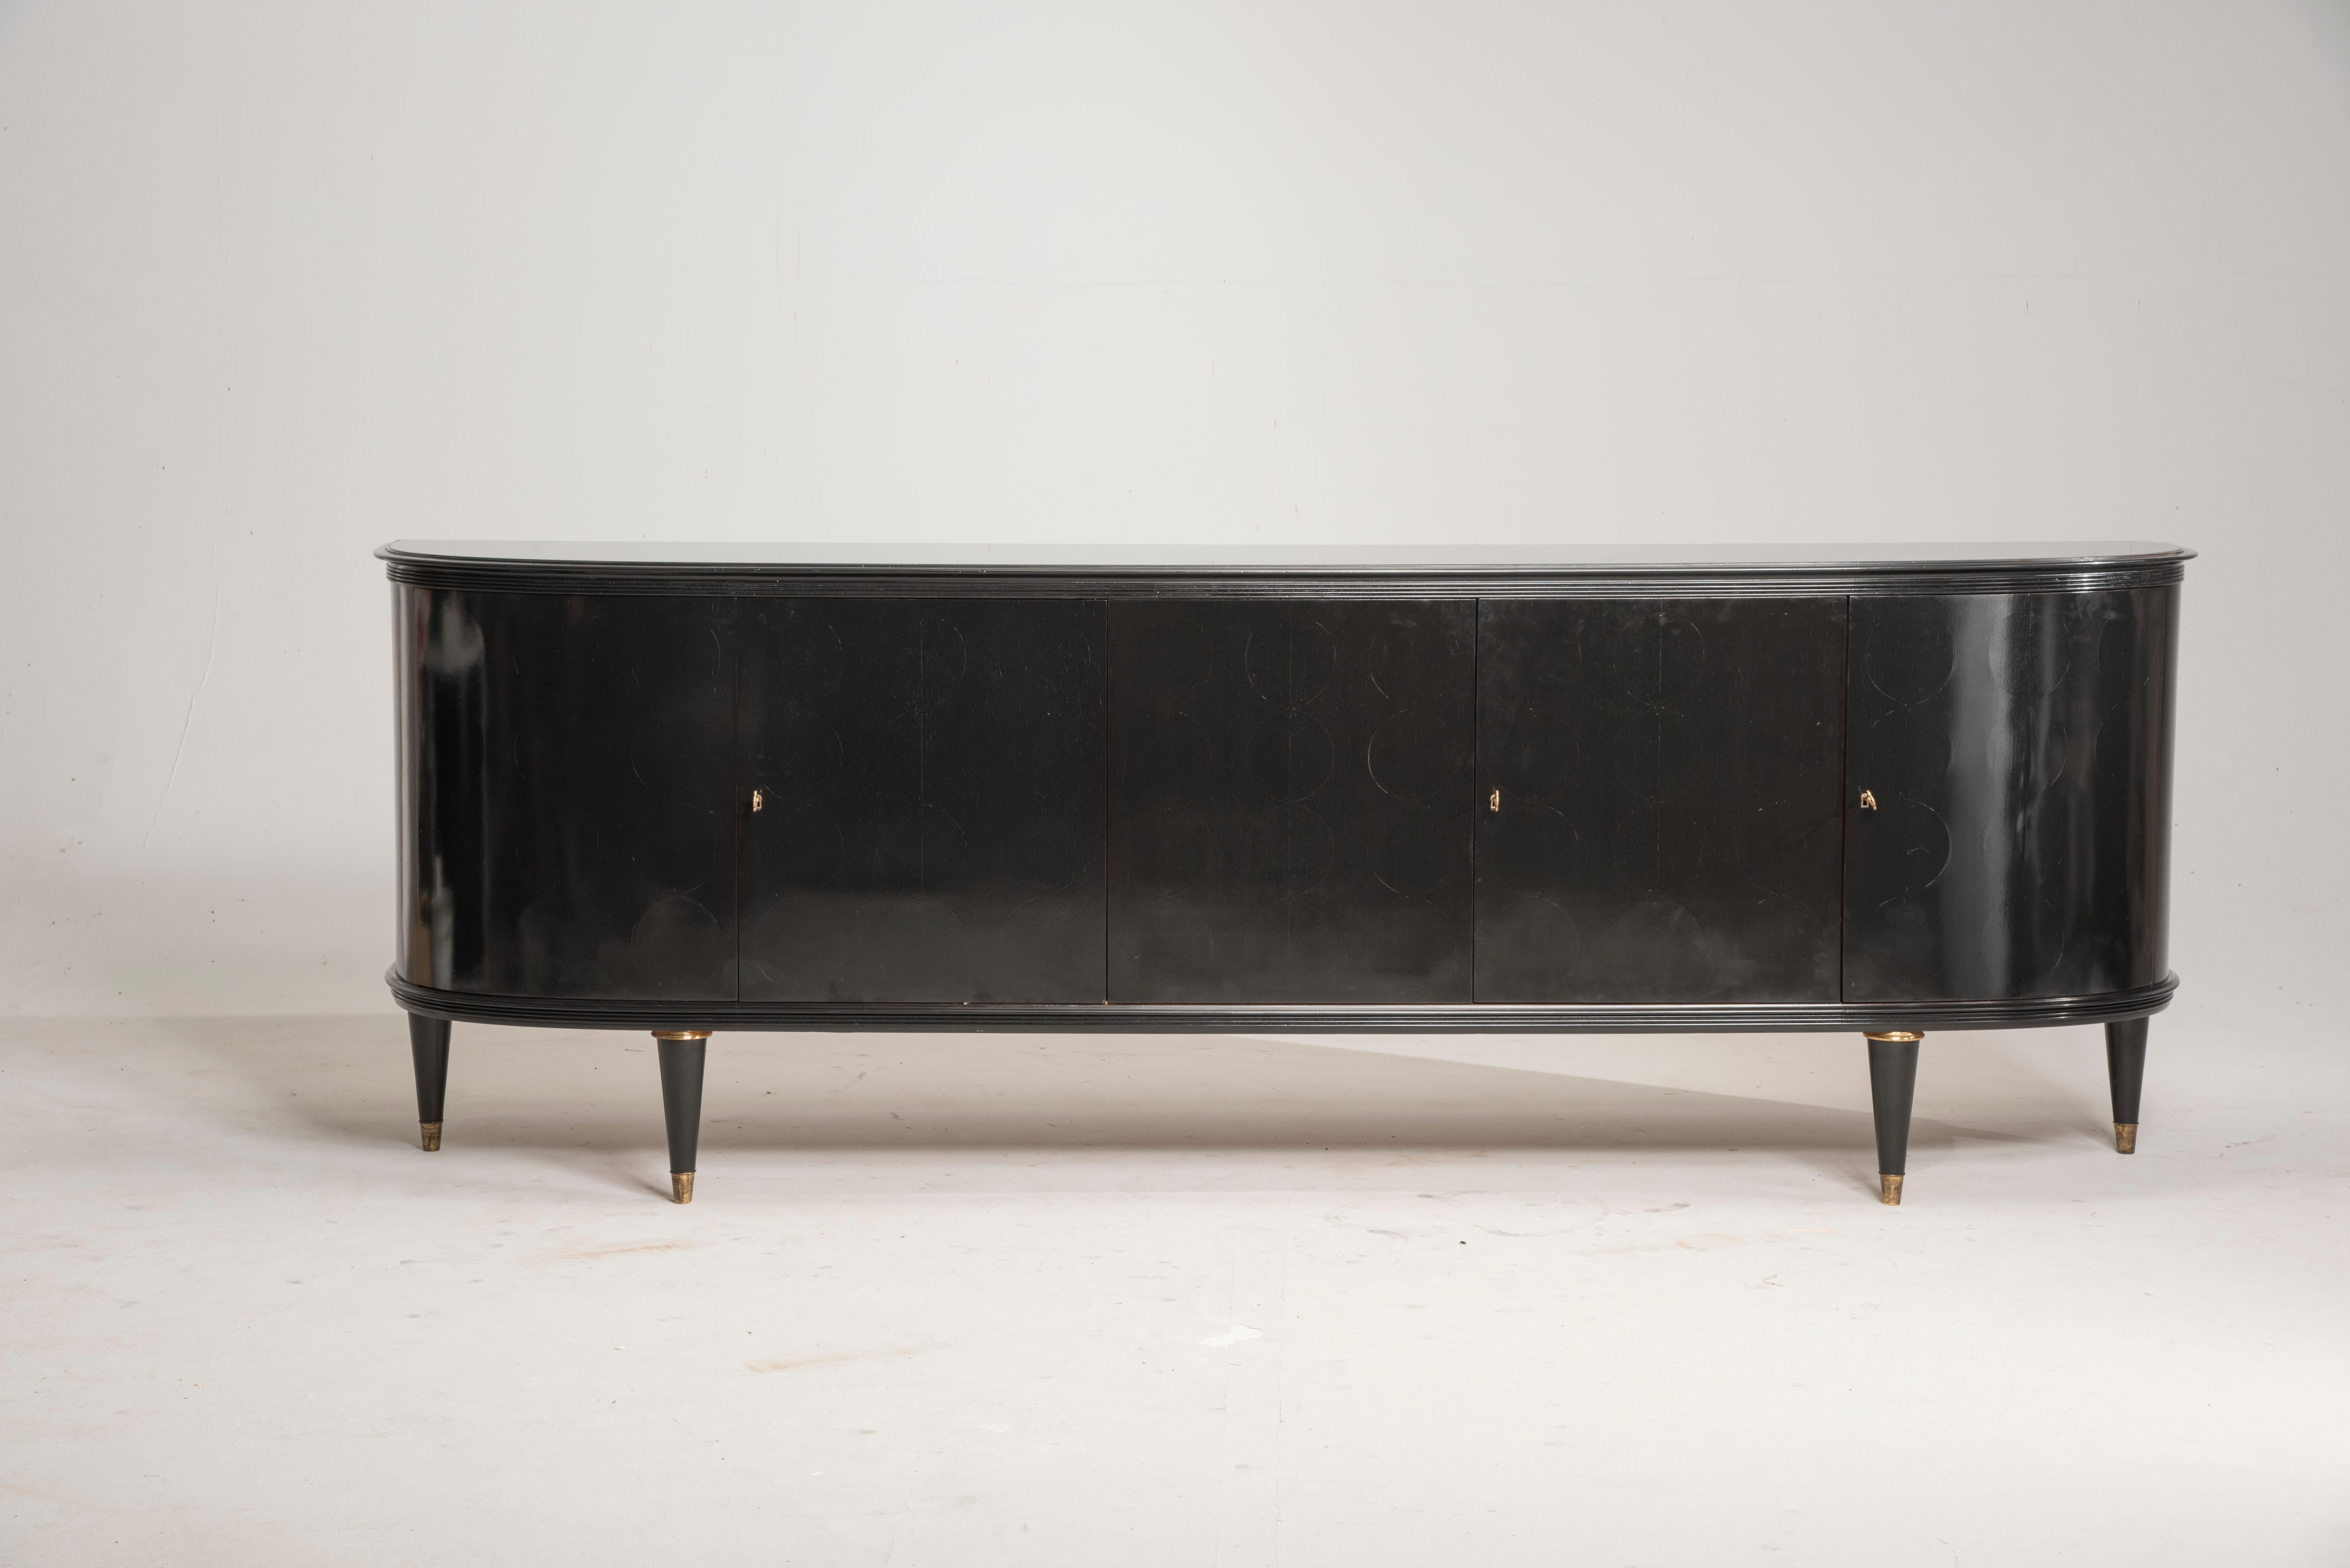 1950s Italian long rounded edges crystal top black buffet with brass feet.
From Italy from 1950s period. Three doors internally are arranged with one shelf. Originally it was in wood color but In the past this has been lacquered in black, we have